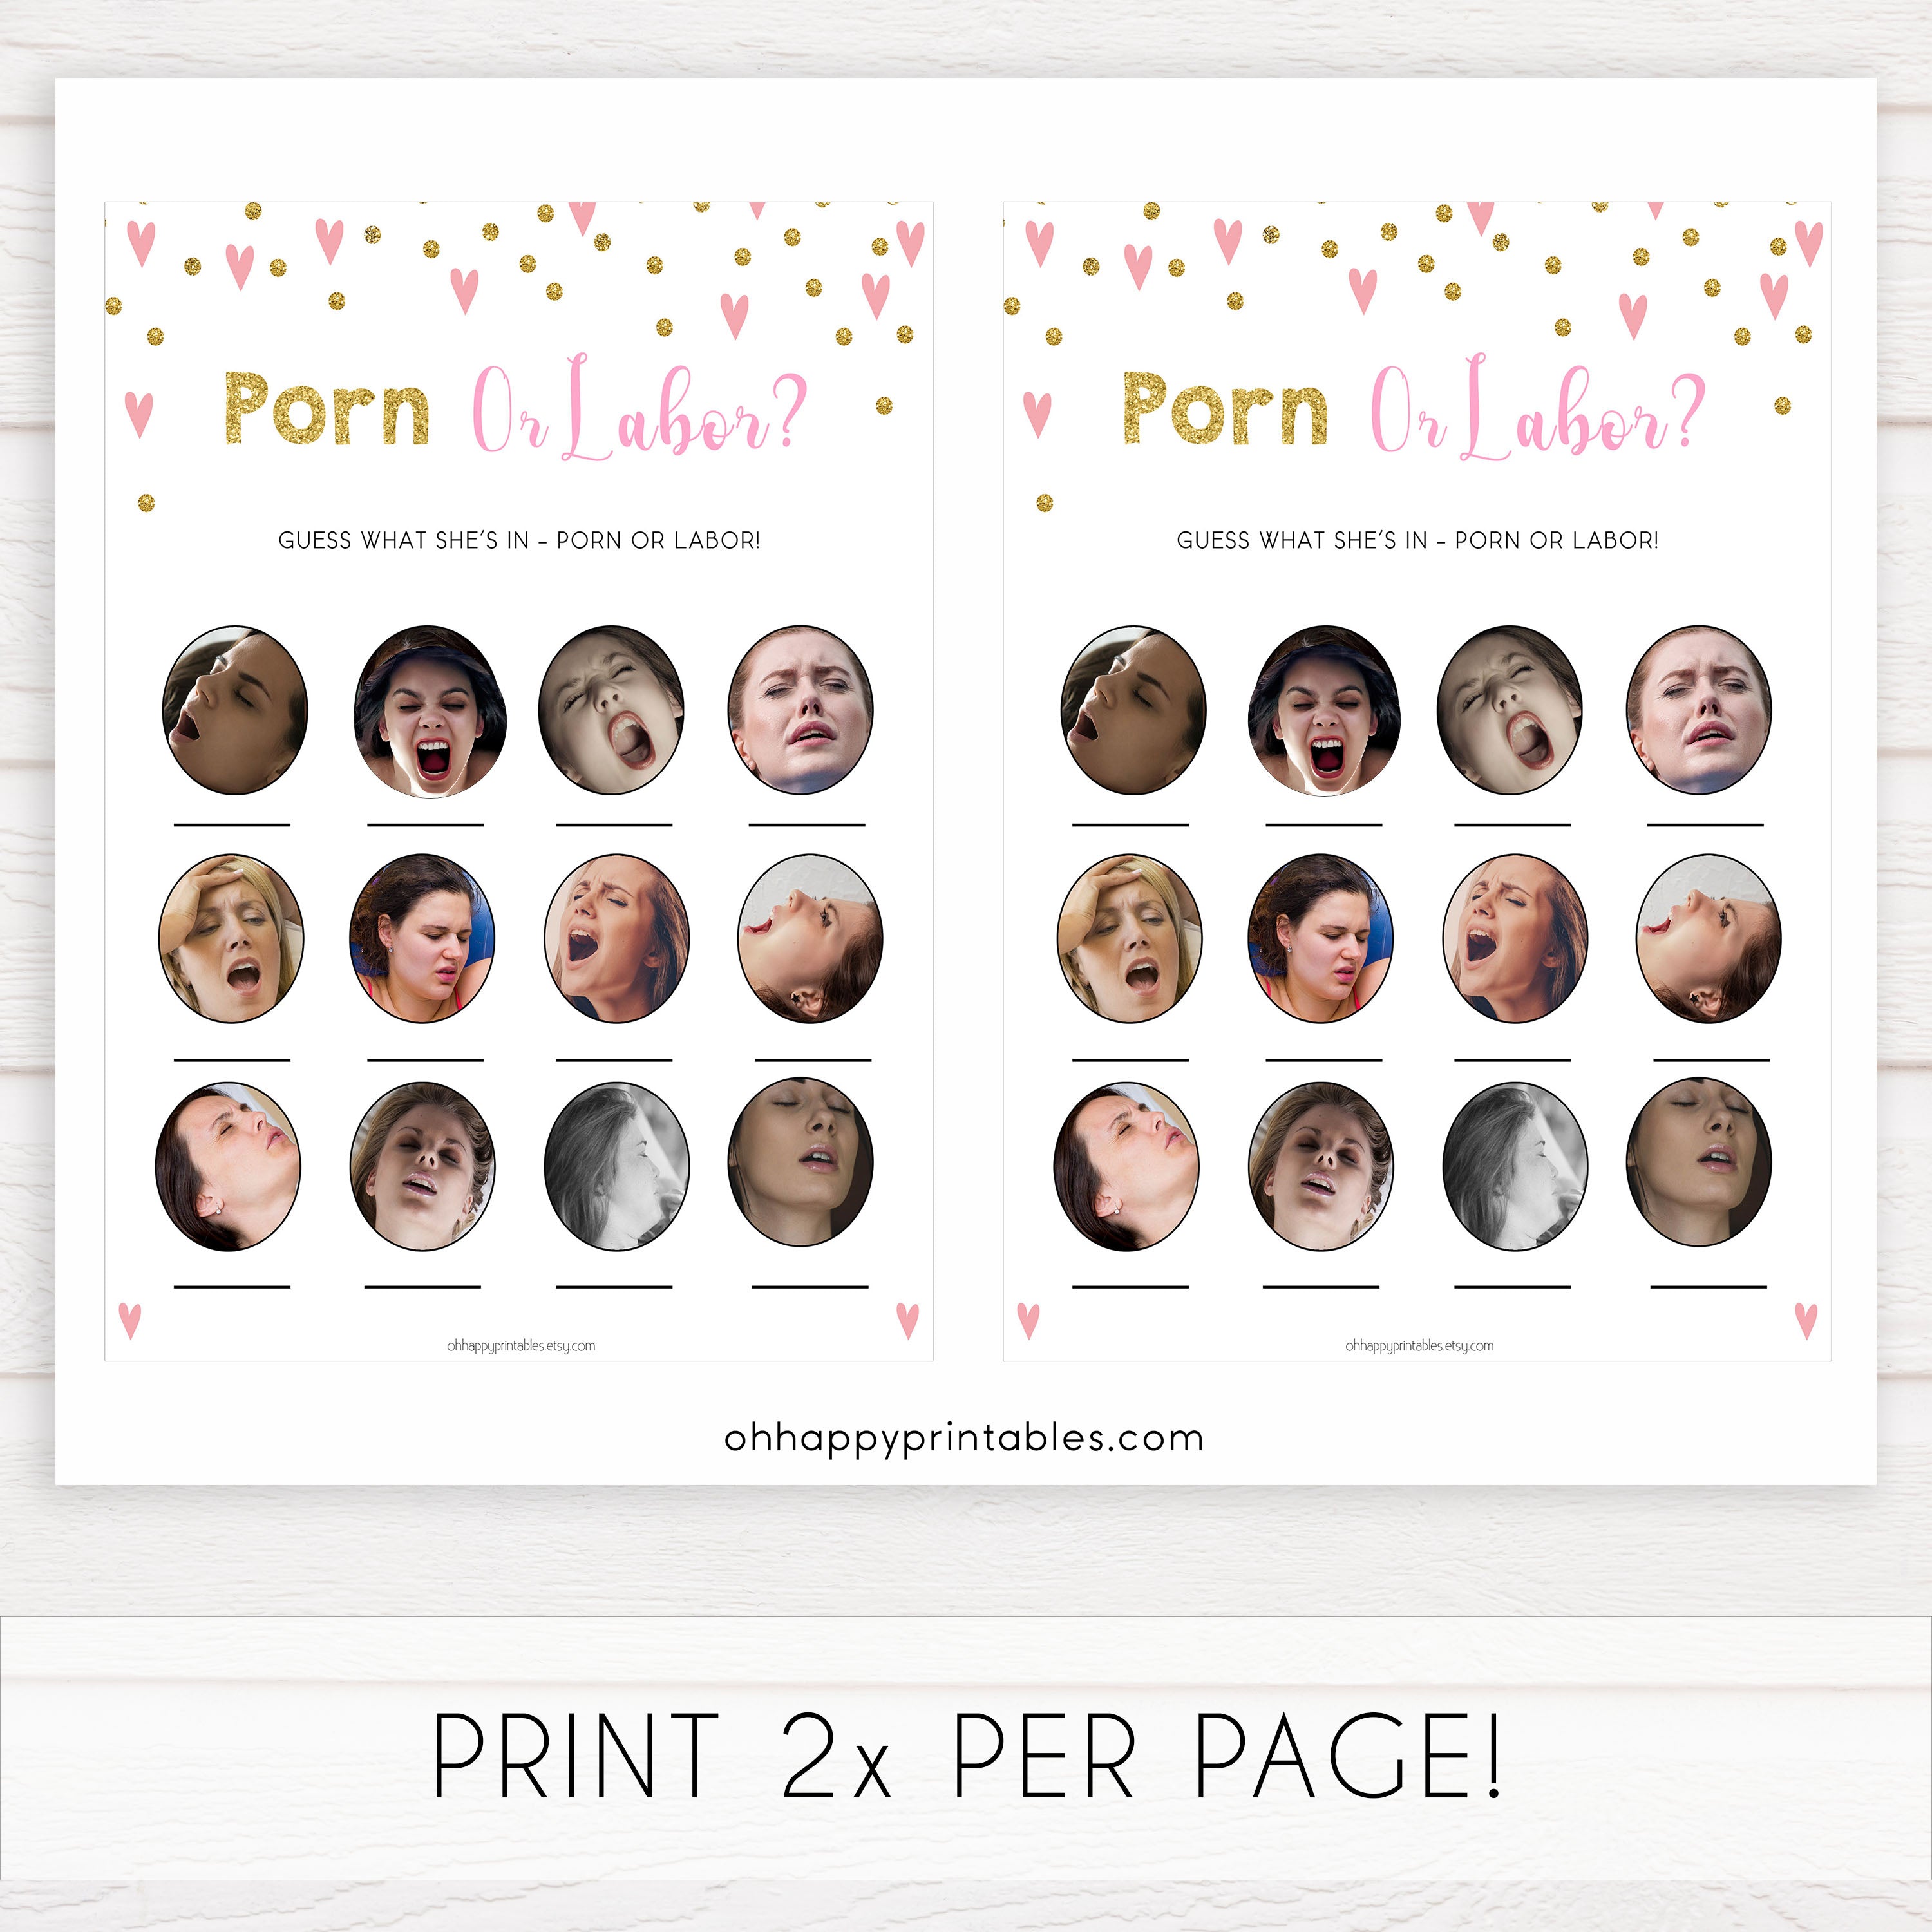 pink hearts baby shower, labor or porn, porn or labour baby game, printable baby games, pink baby games, girl baby games, top 10 baby games, fun baby games